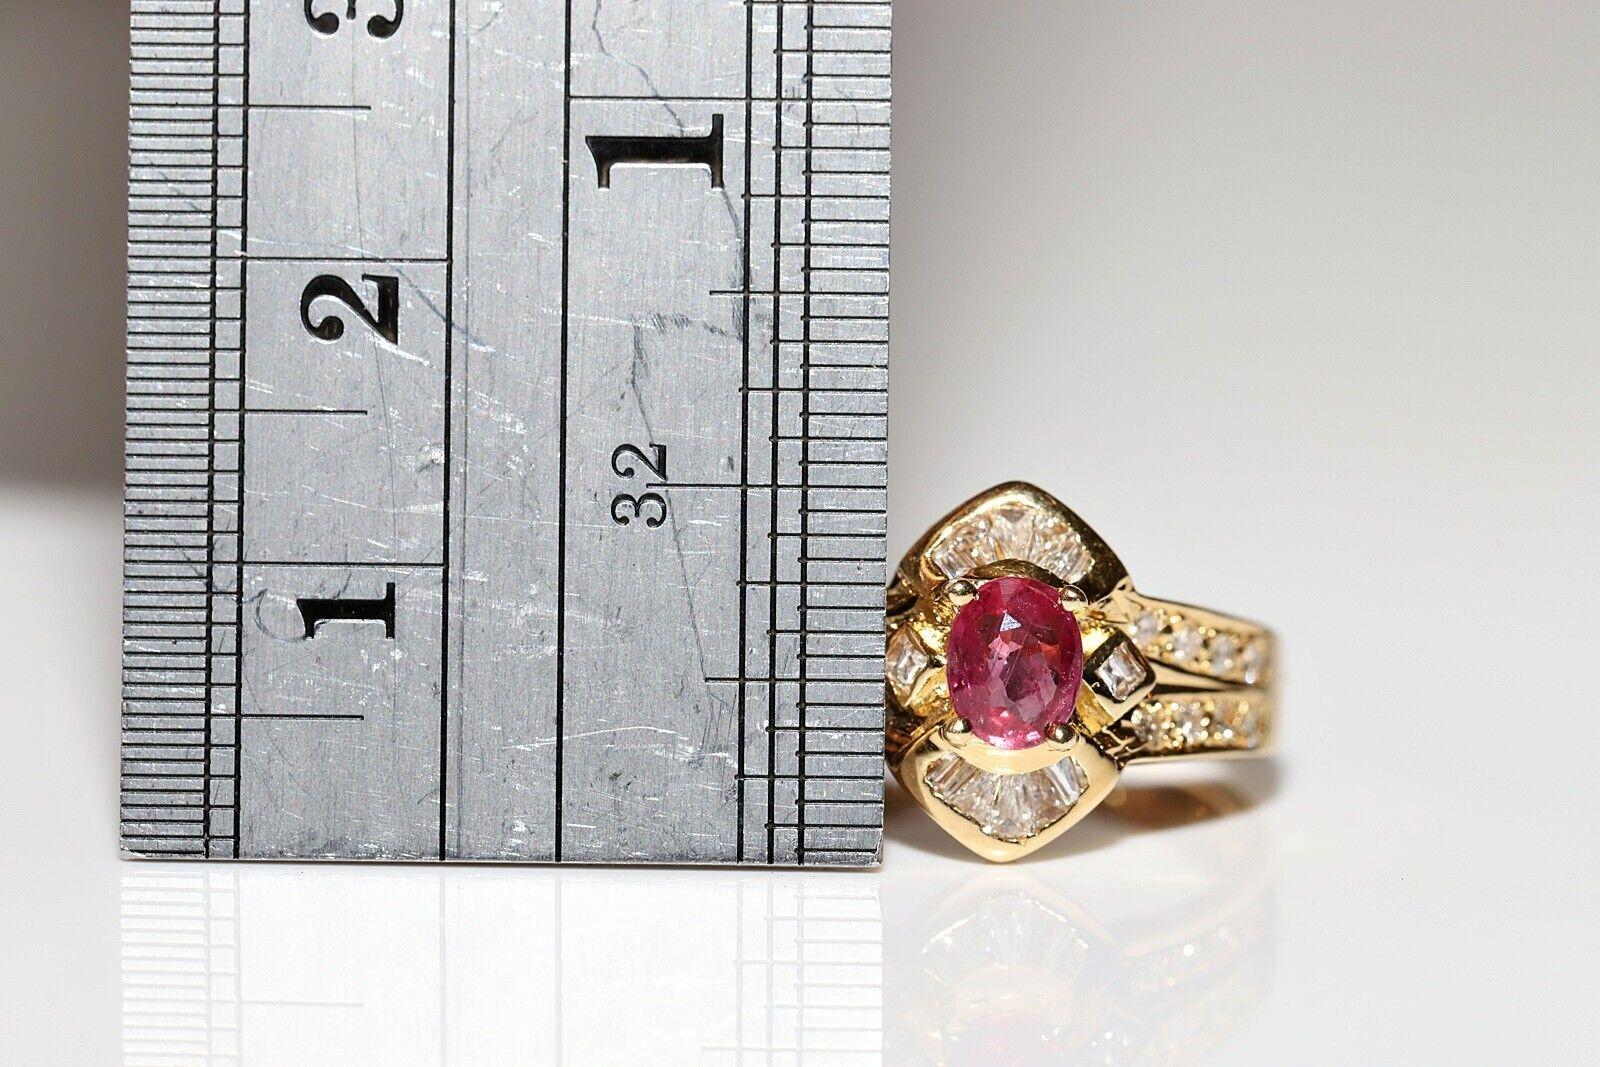 In very good condition.
Total weight is 5.2 grams.
Totally is diamond  0.38 carat.
The diamond is has G-H color and vvs-vs-s1 clarity.
Totally is ruby 0.52 carat.
Ring size is US 5.4 (We offer free resizing)
We can make any size.
Box is not